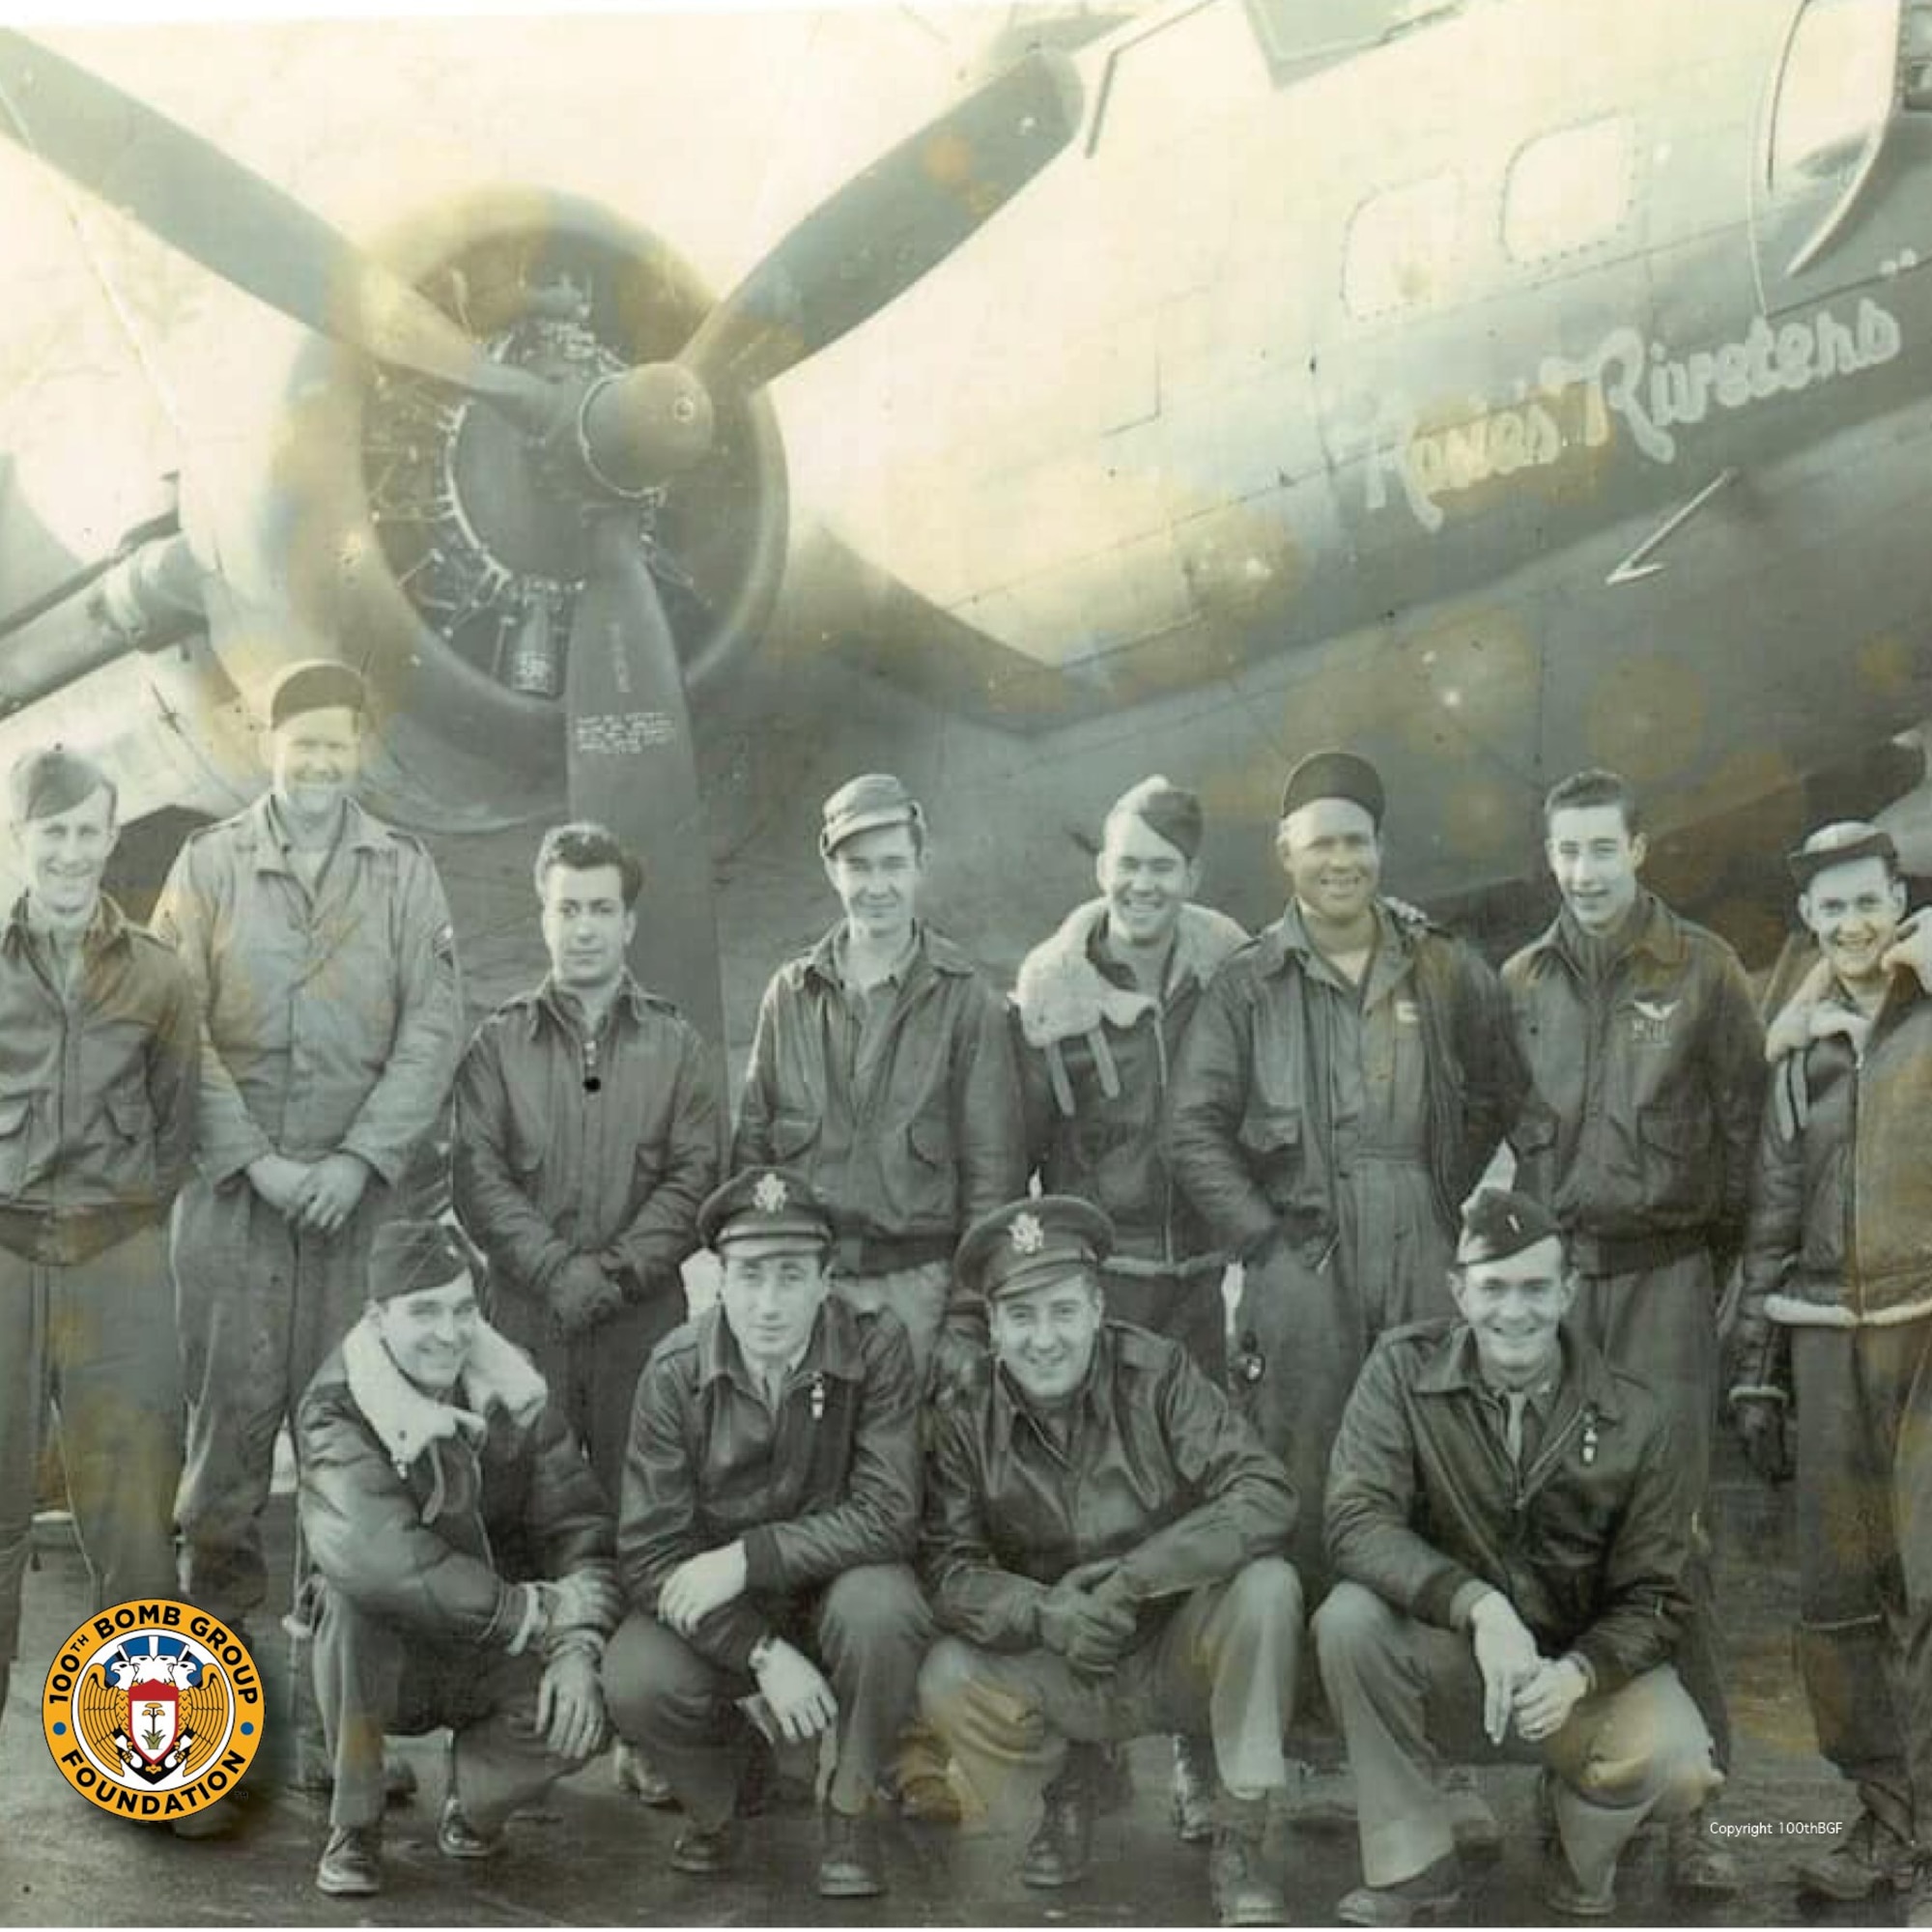 U.S. Army Air Forces Lt. Col. Robert “Rosie” Rosenthal, kneeling, second left, and his air and ground crew pose for a photo in 1944, at Thorpe Abbotts, Diss, England, in front of the original “Rosie’s Riveters” B-17 Flying Fortress. Rosie, a legendary pilot during World War II, led every one of the 52 missions he flew from Thorpe Abbotts. One of the 100th Air Refueling Wing’s KC-135 Stratotanker aircraft, tail number 58-0089, was renamed Rosie’s Riveters June 10, 2021, in Rosenthal’s honor. The jet is being “adopted” by the 100th Maintenance Group as a way to reconnect Airmen with 100th BG history. (Photo courtesy of the 100th Bomb Group Foundation website)